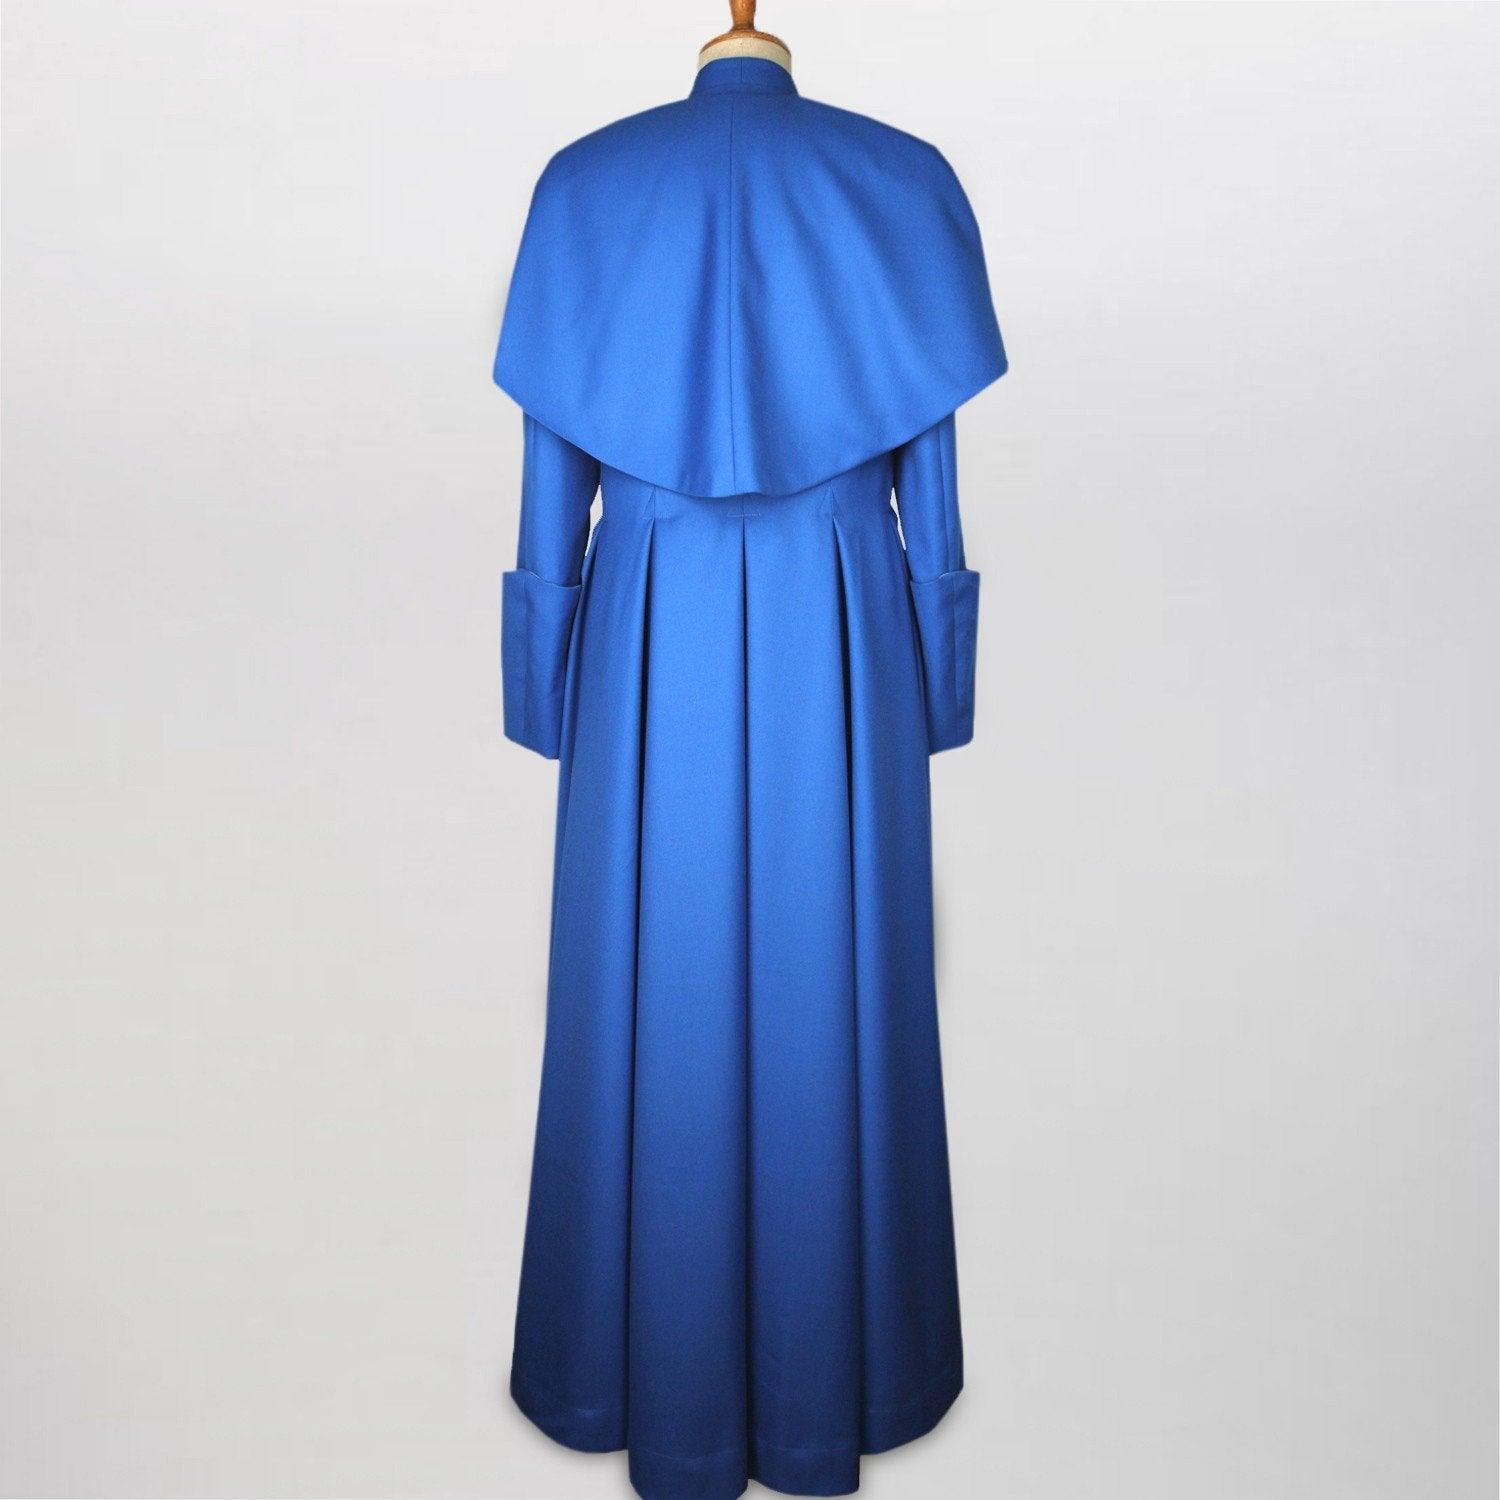 Bespoke Hereford Cathedral Cassock - Watts & Co. (international)